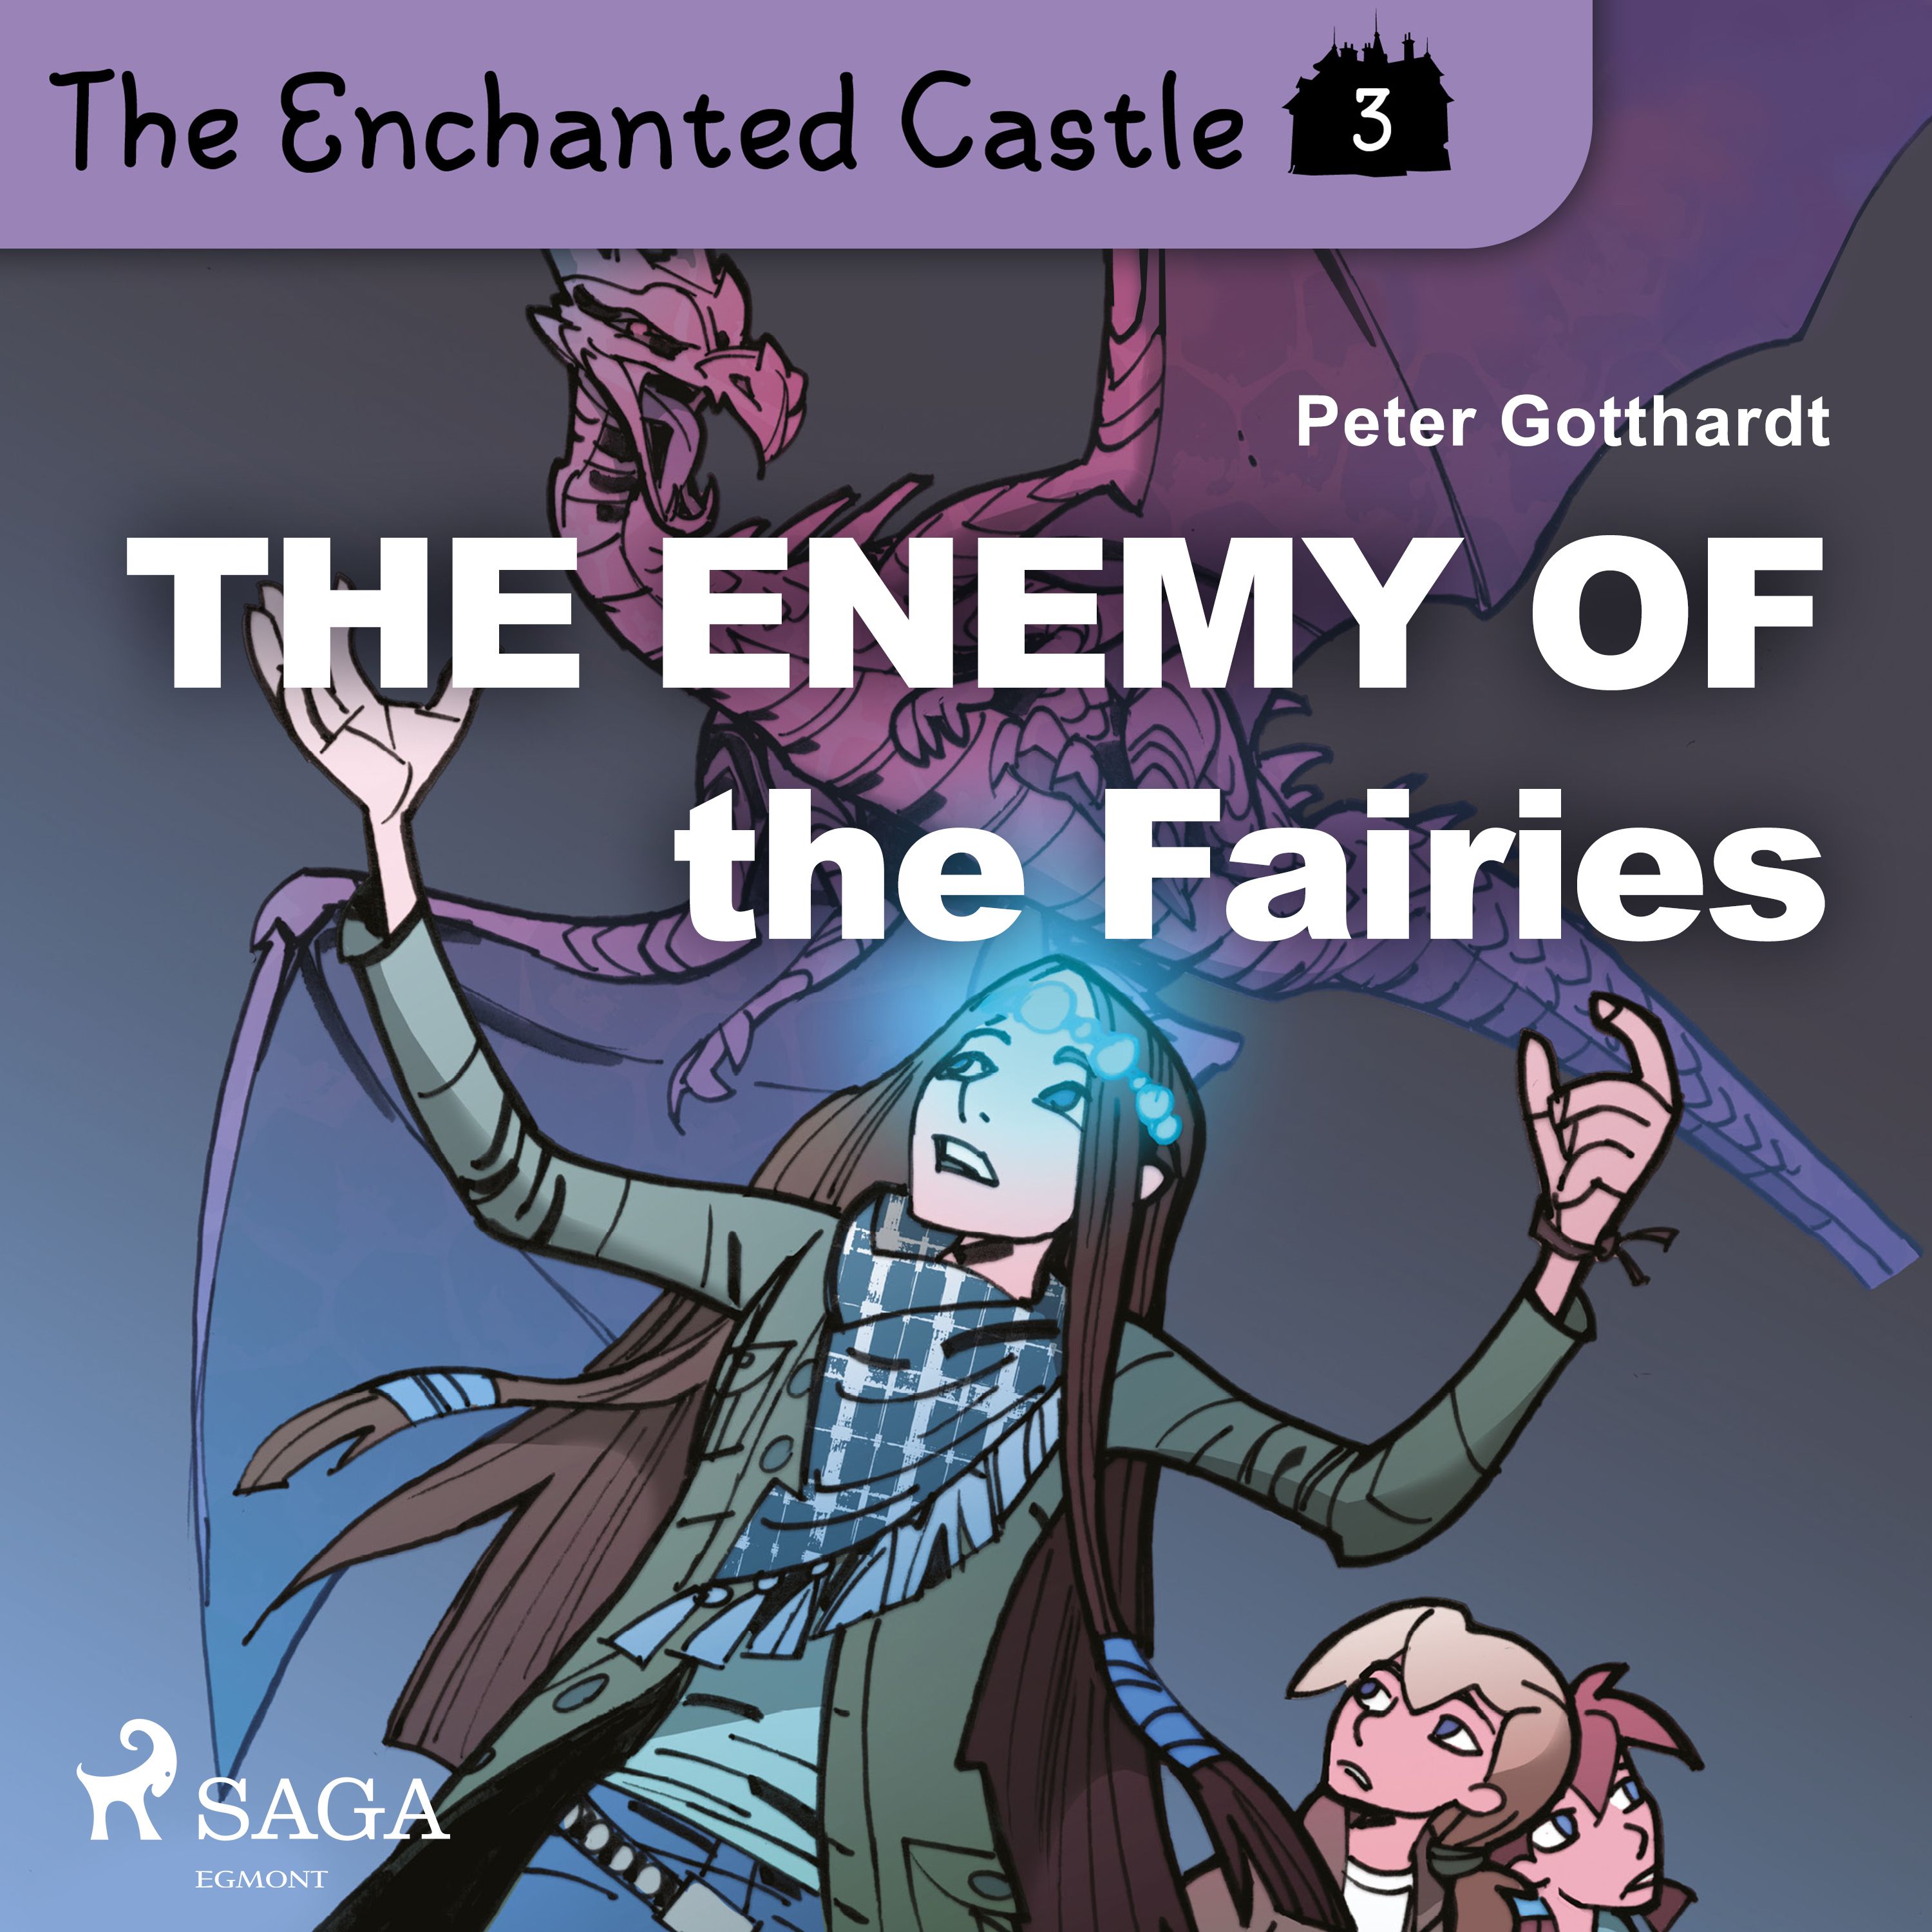 The Enchanted Castle 3 - The Enemy of the Fairies, audiobook by Peter Gotthardt